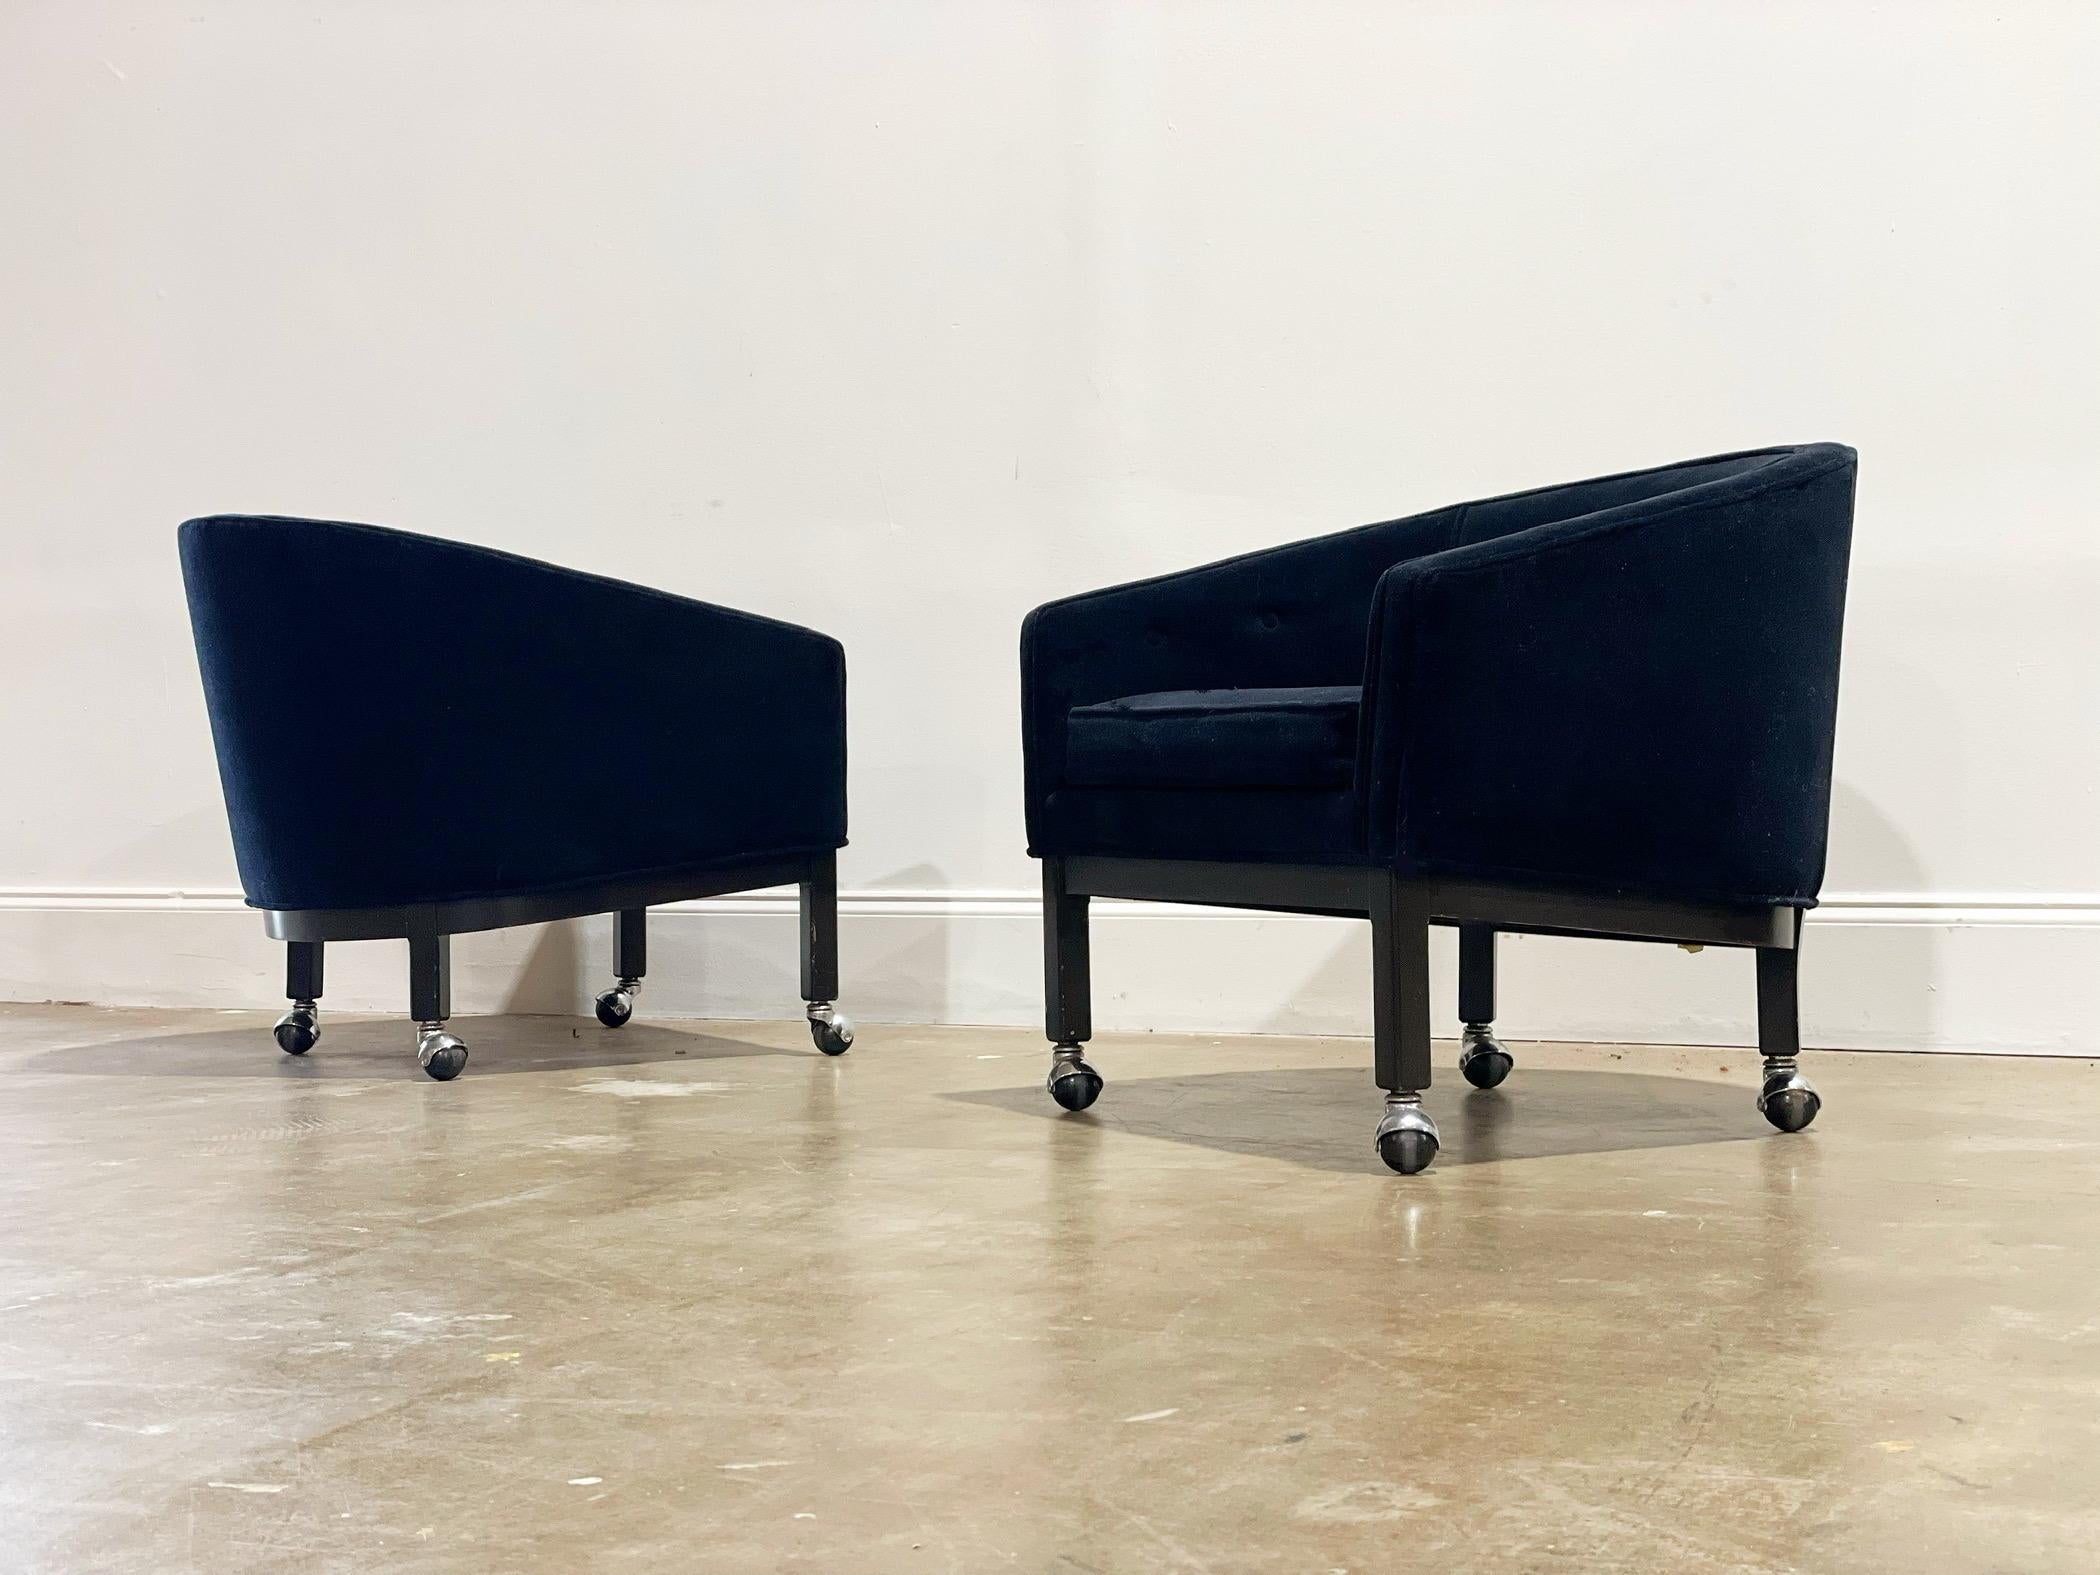 Exceptional barrel back lounge chairs by Kipp Stewart for Directional with all original tufted black velvet. Solid dark mahogany bases with chrome casters. An elegant and modern silhouette lends to a multitude of design esthetics. Attended to by our